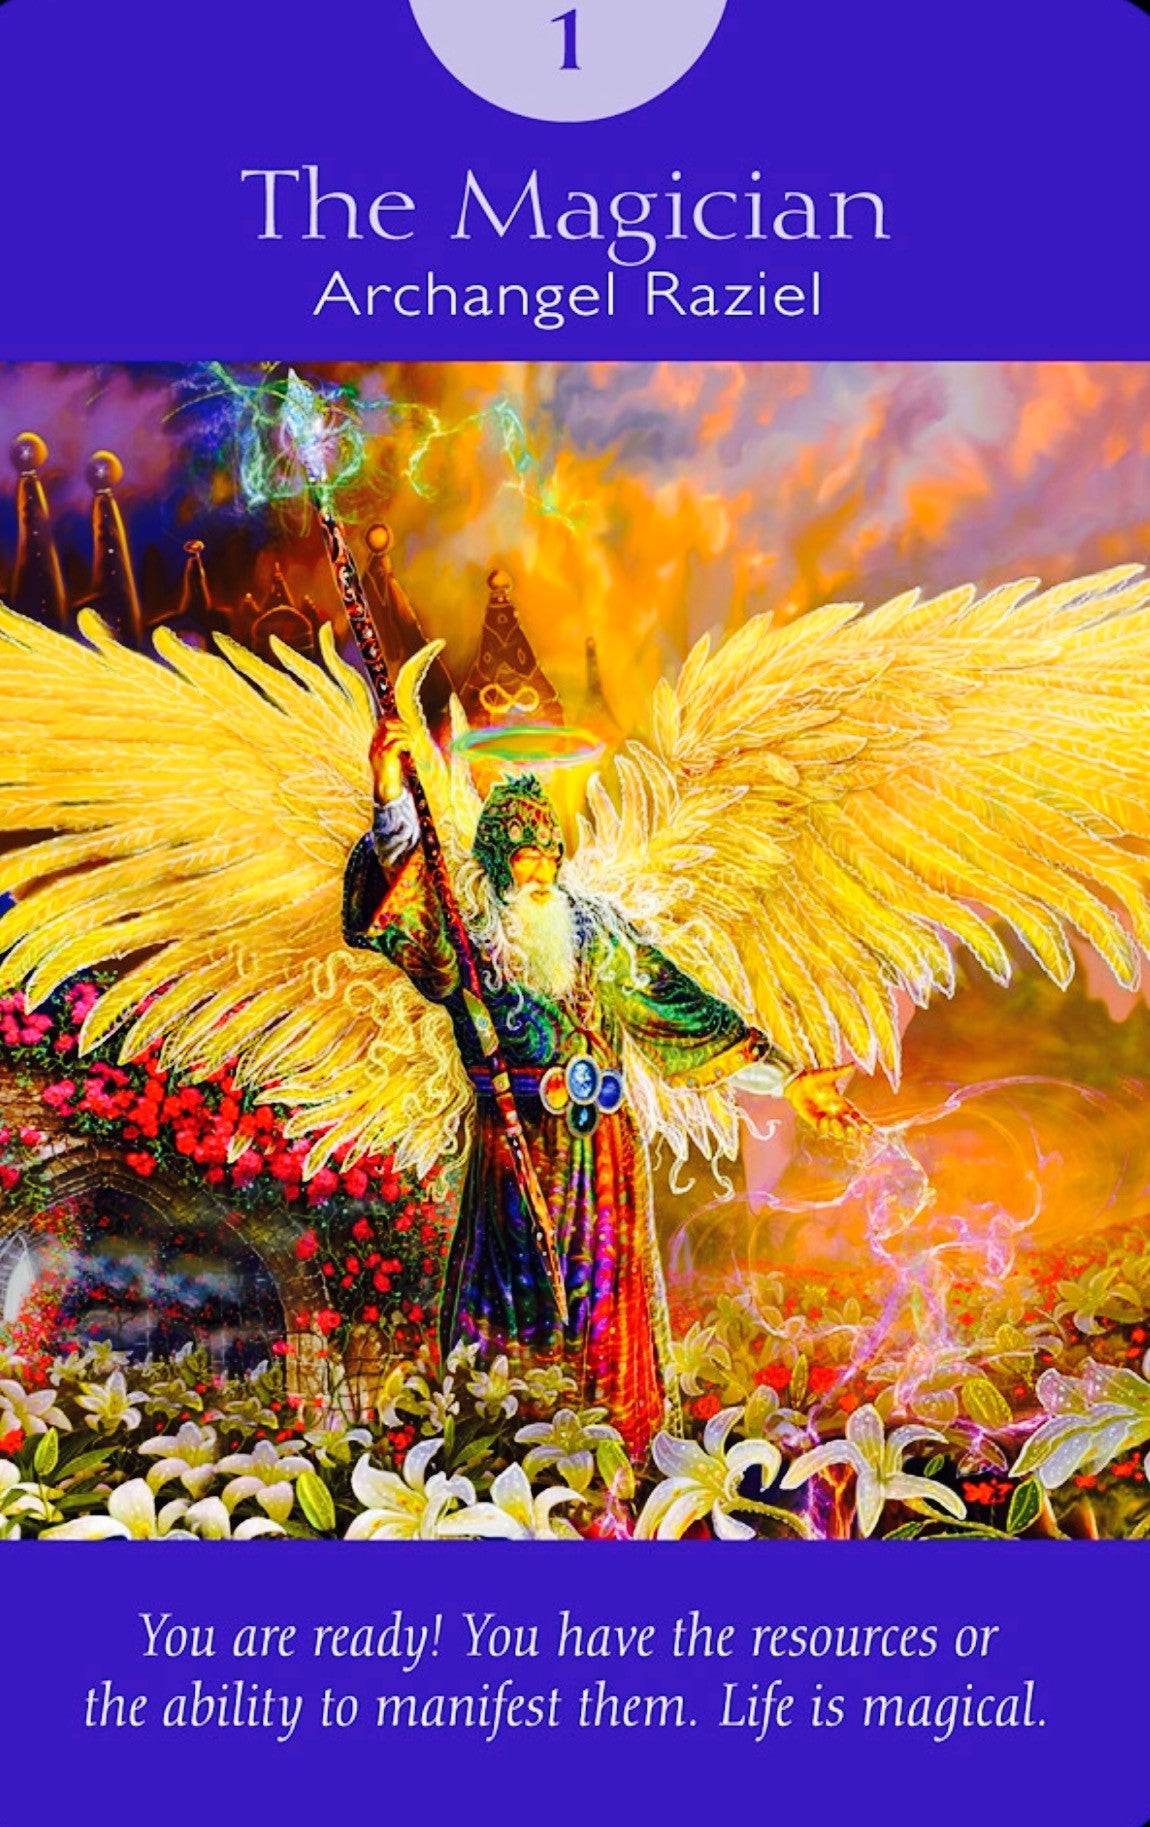 Archangel Raziel: The Magician: “You are ready! You have the resources or the ability to manifest them. Life is magical.”